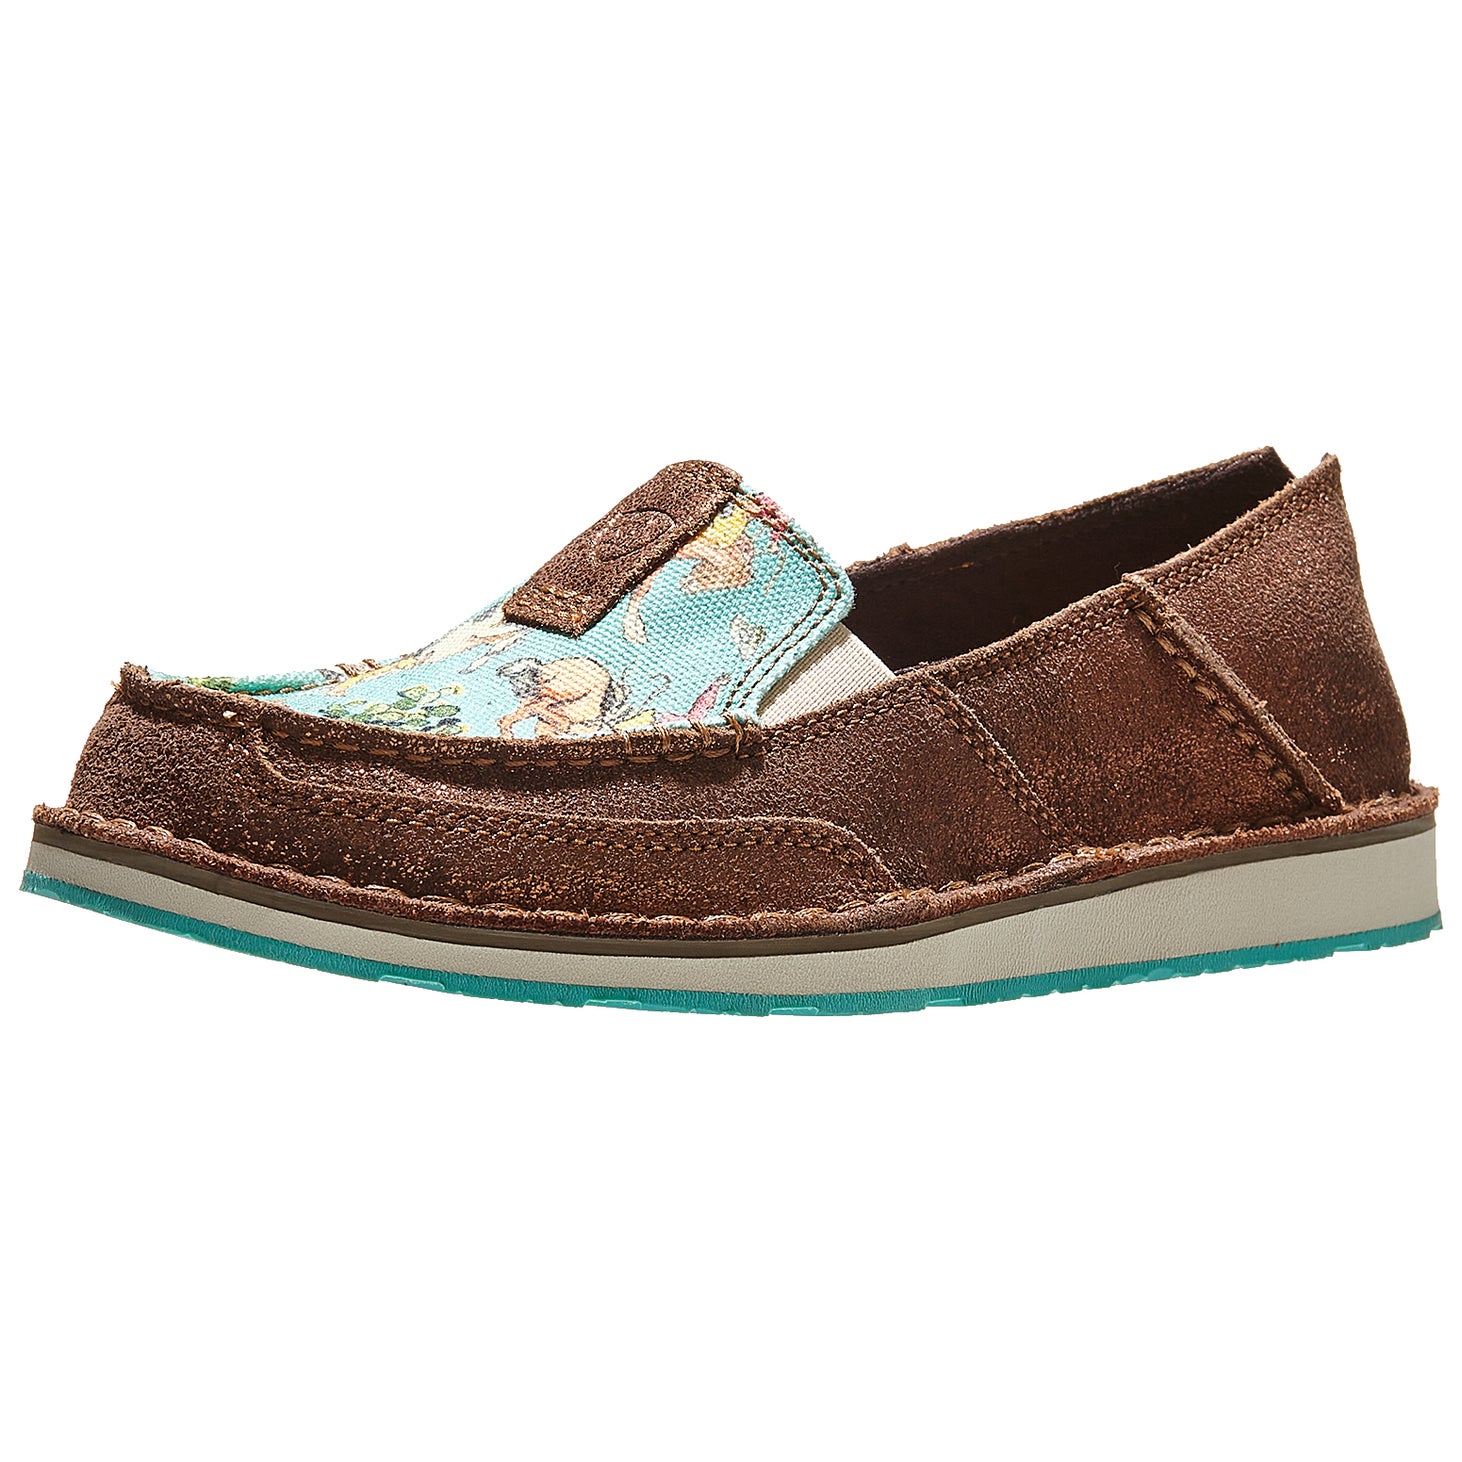 Ariat Western Cruiser Shoes Copper/Bucking Turquoise | Riding Warehouse